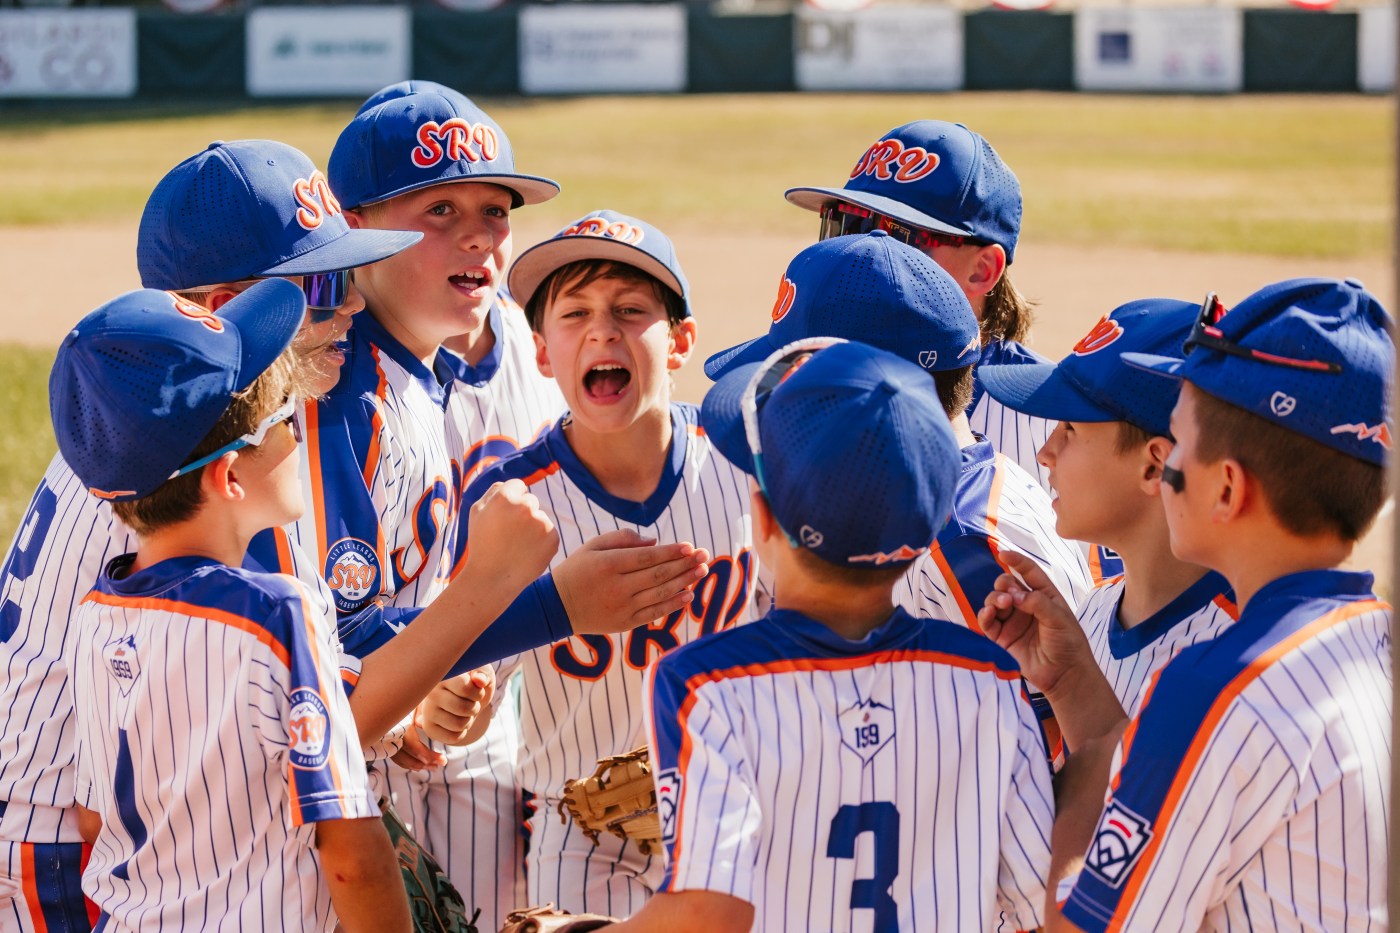 east-bay-little-league-team-wins-first-norcal-state-championship-in-20-years